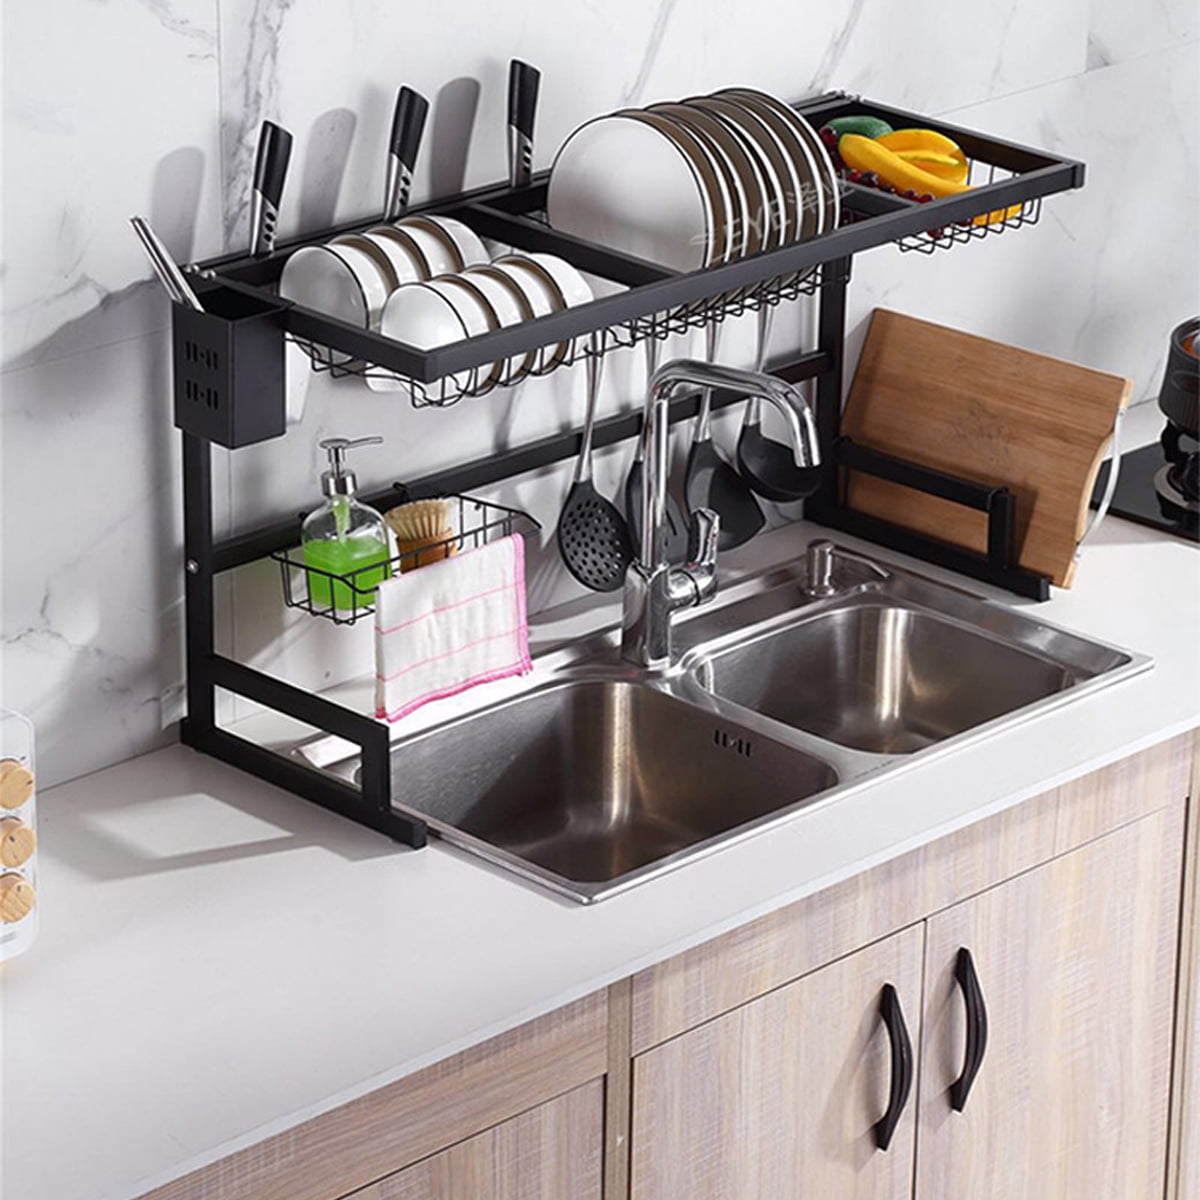 Details about   2 Tier Stainless Kitchen Dish Rack Sink Drainer Plate Drying Shelf Organizer Acc 